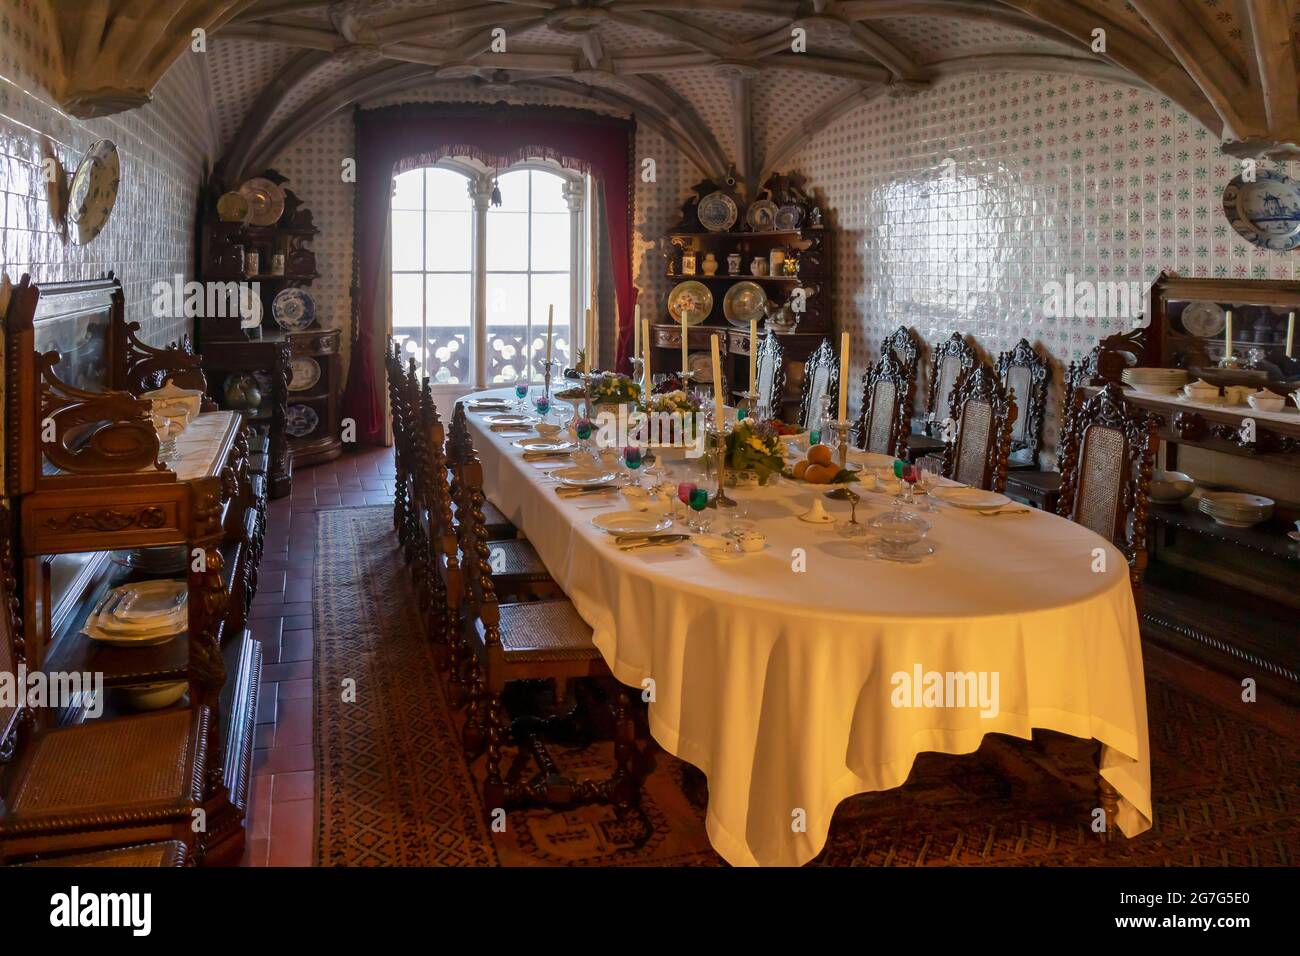 The dining room, originally the refectory of the Hieronymite monks at the Pena National Palace, Sintra, Lisbon District, Portugal.  The Romantic style Stock Photo